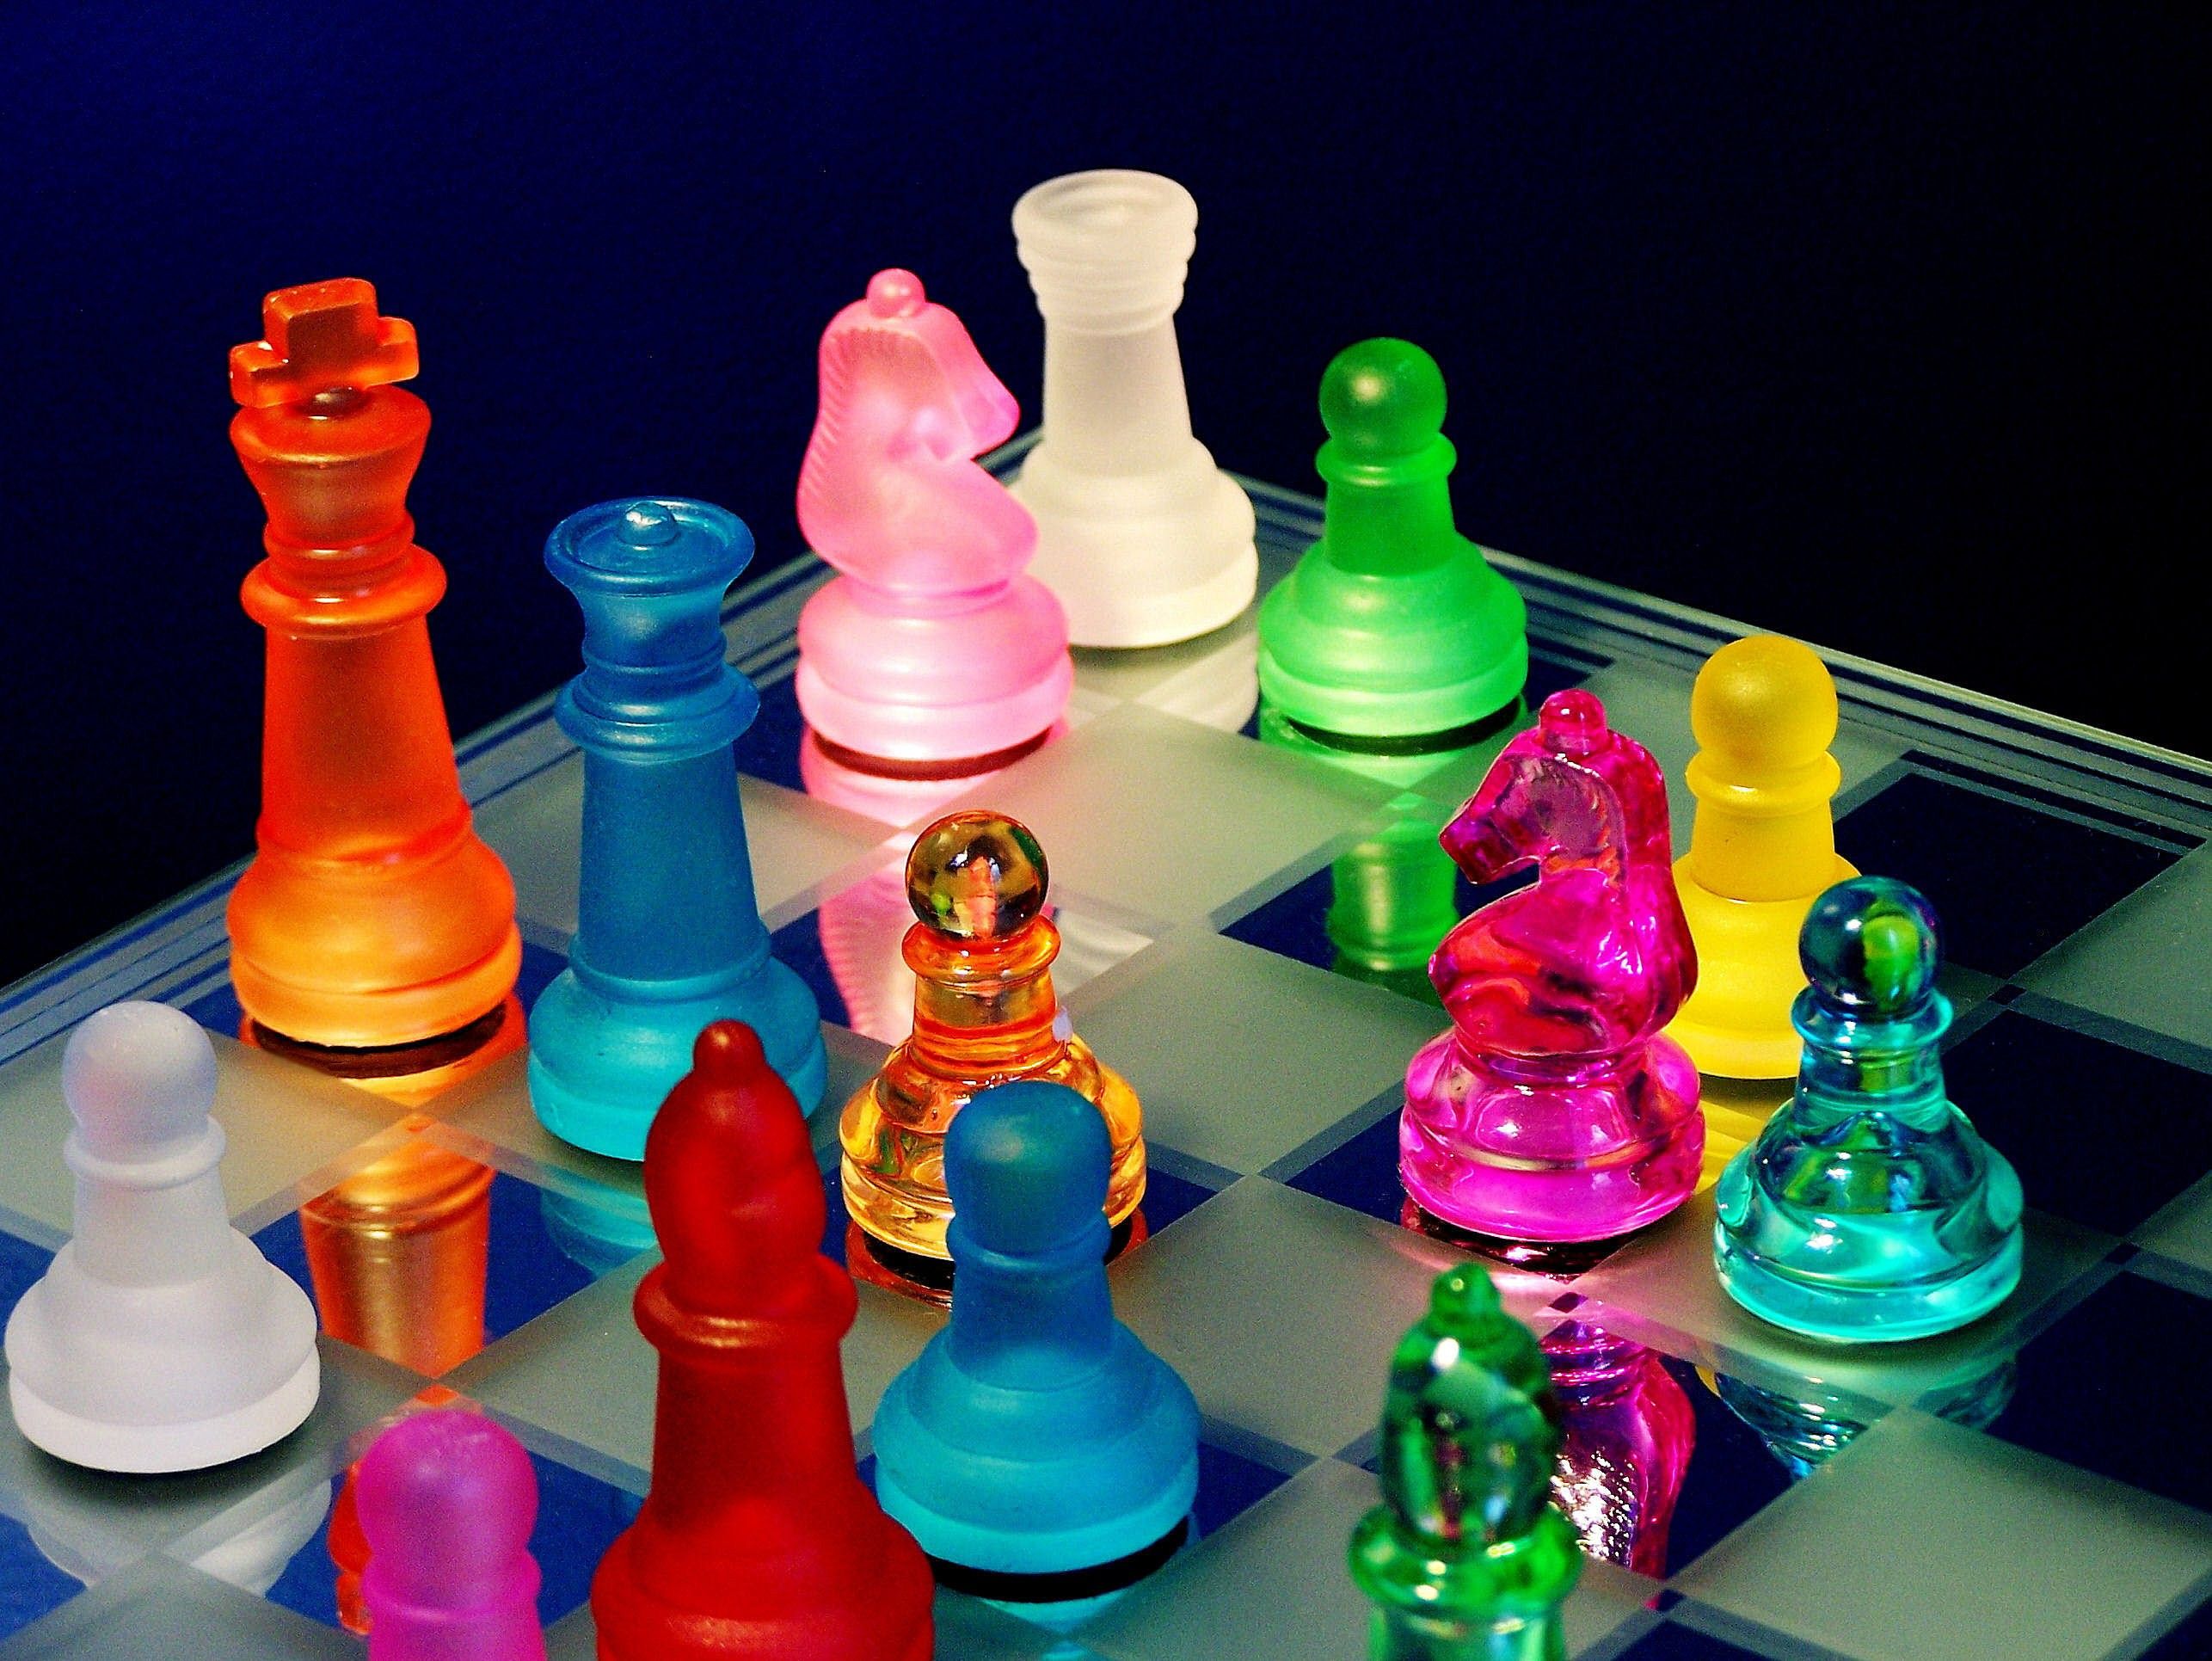 Full Definition, Images Store - Colored Glass Chess Set - HD Wallpaper 